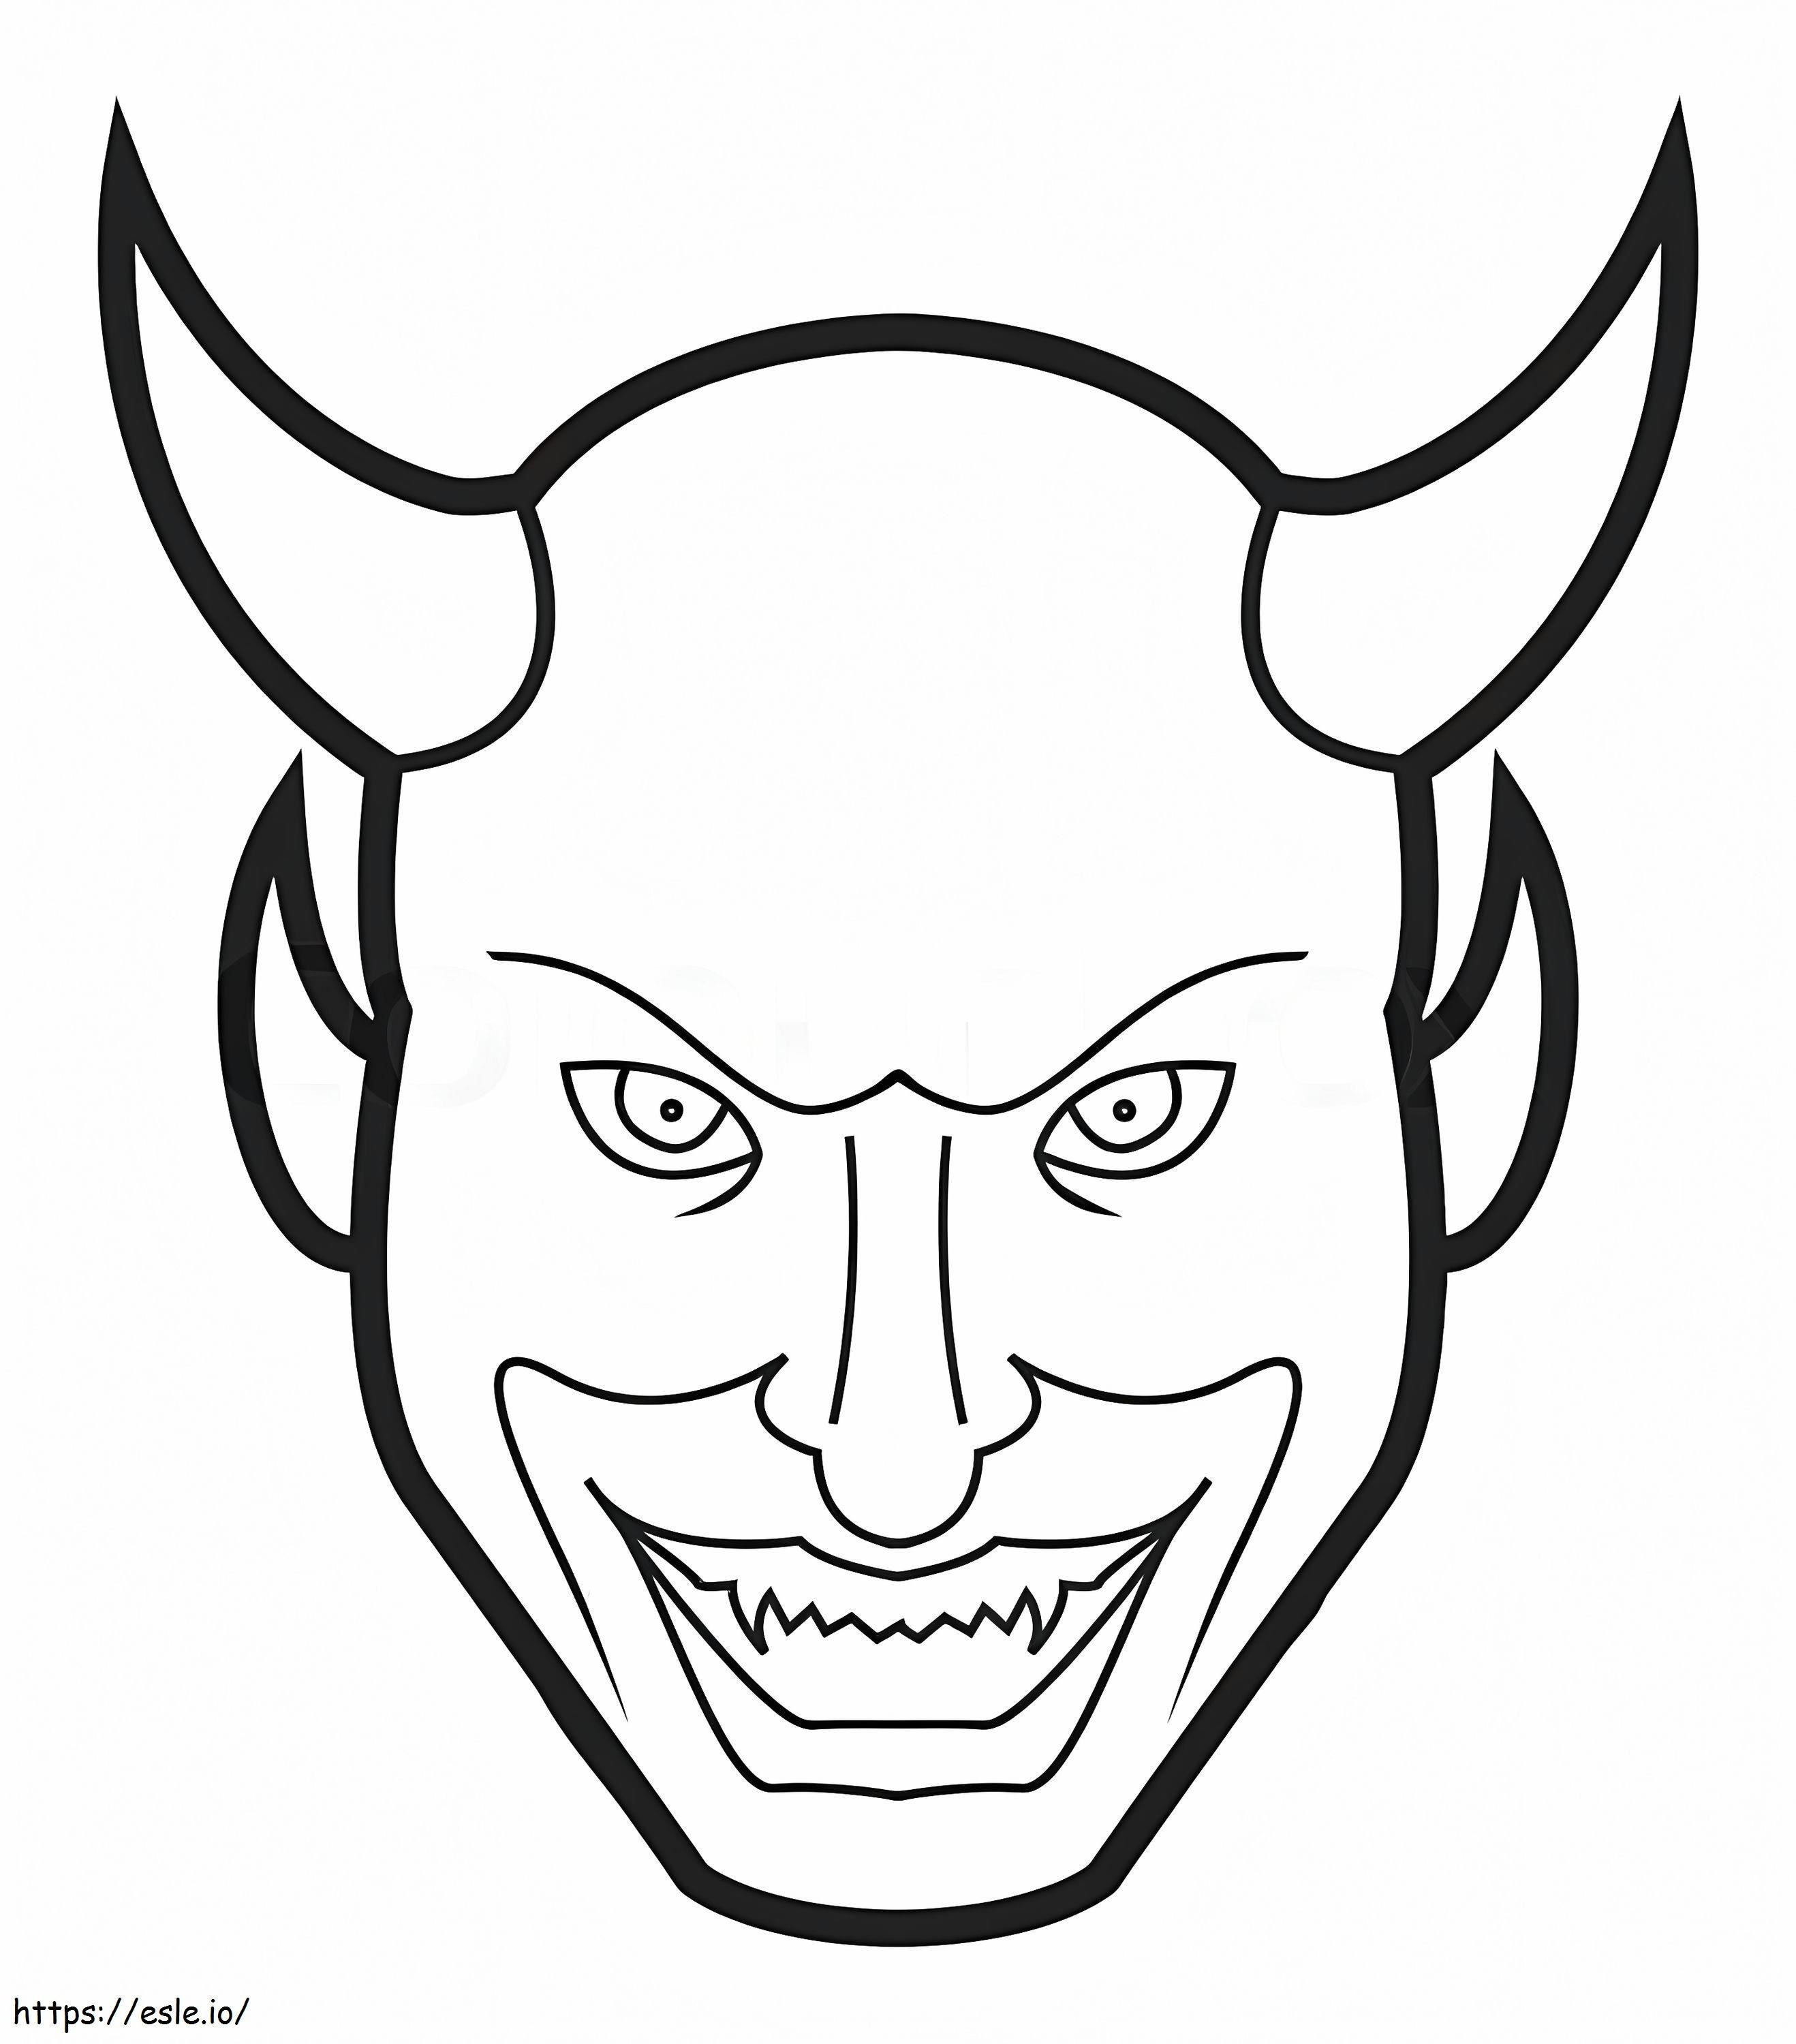 Demon Smiley Face coloring page